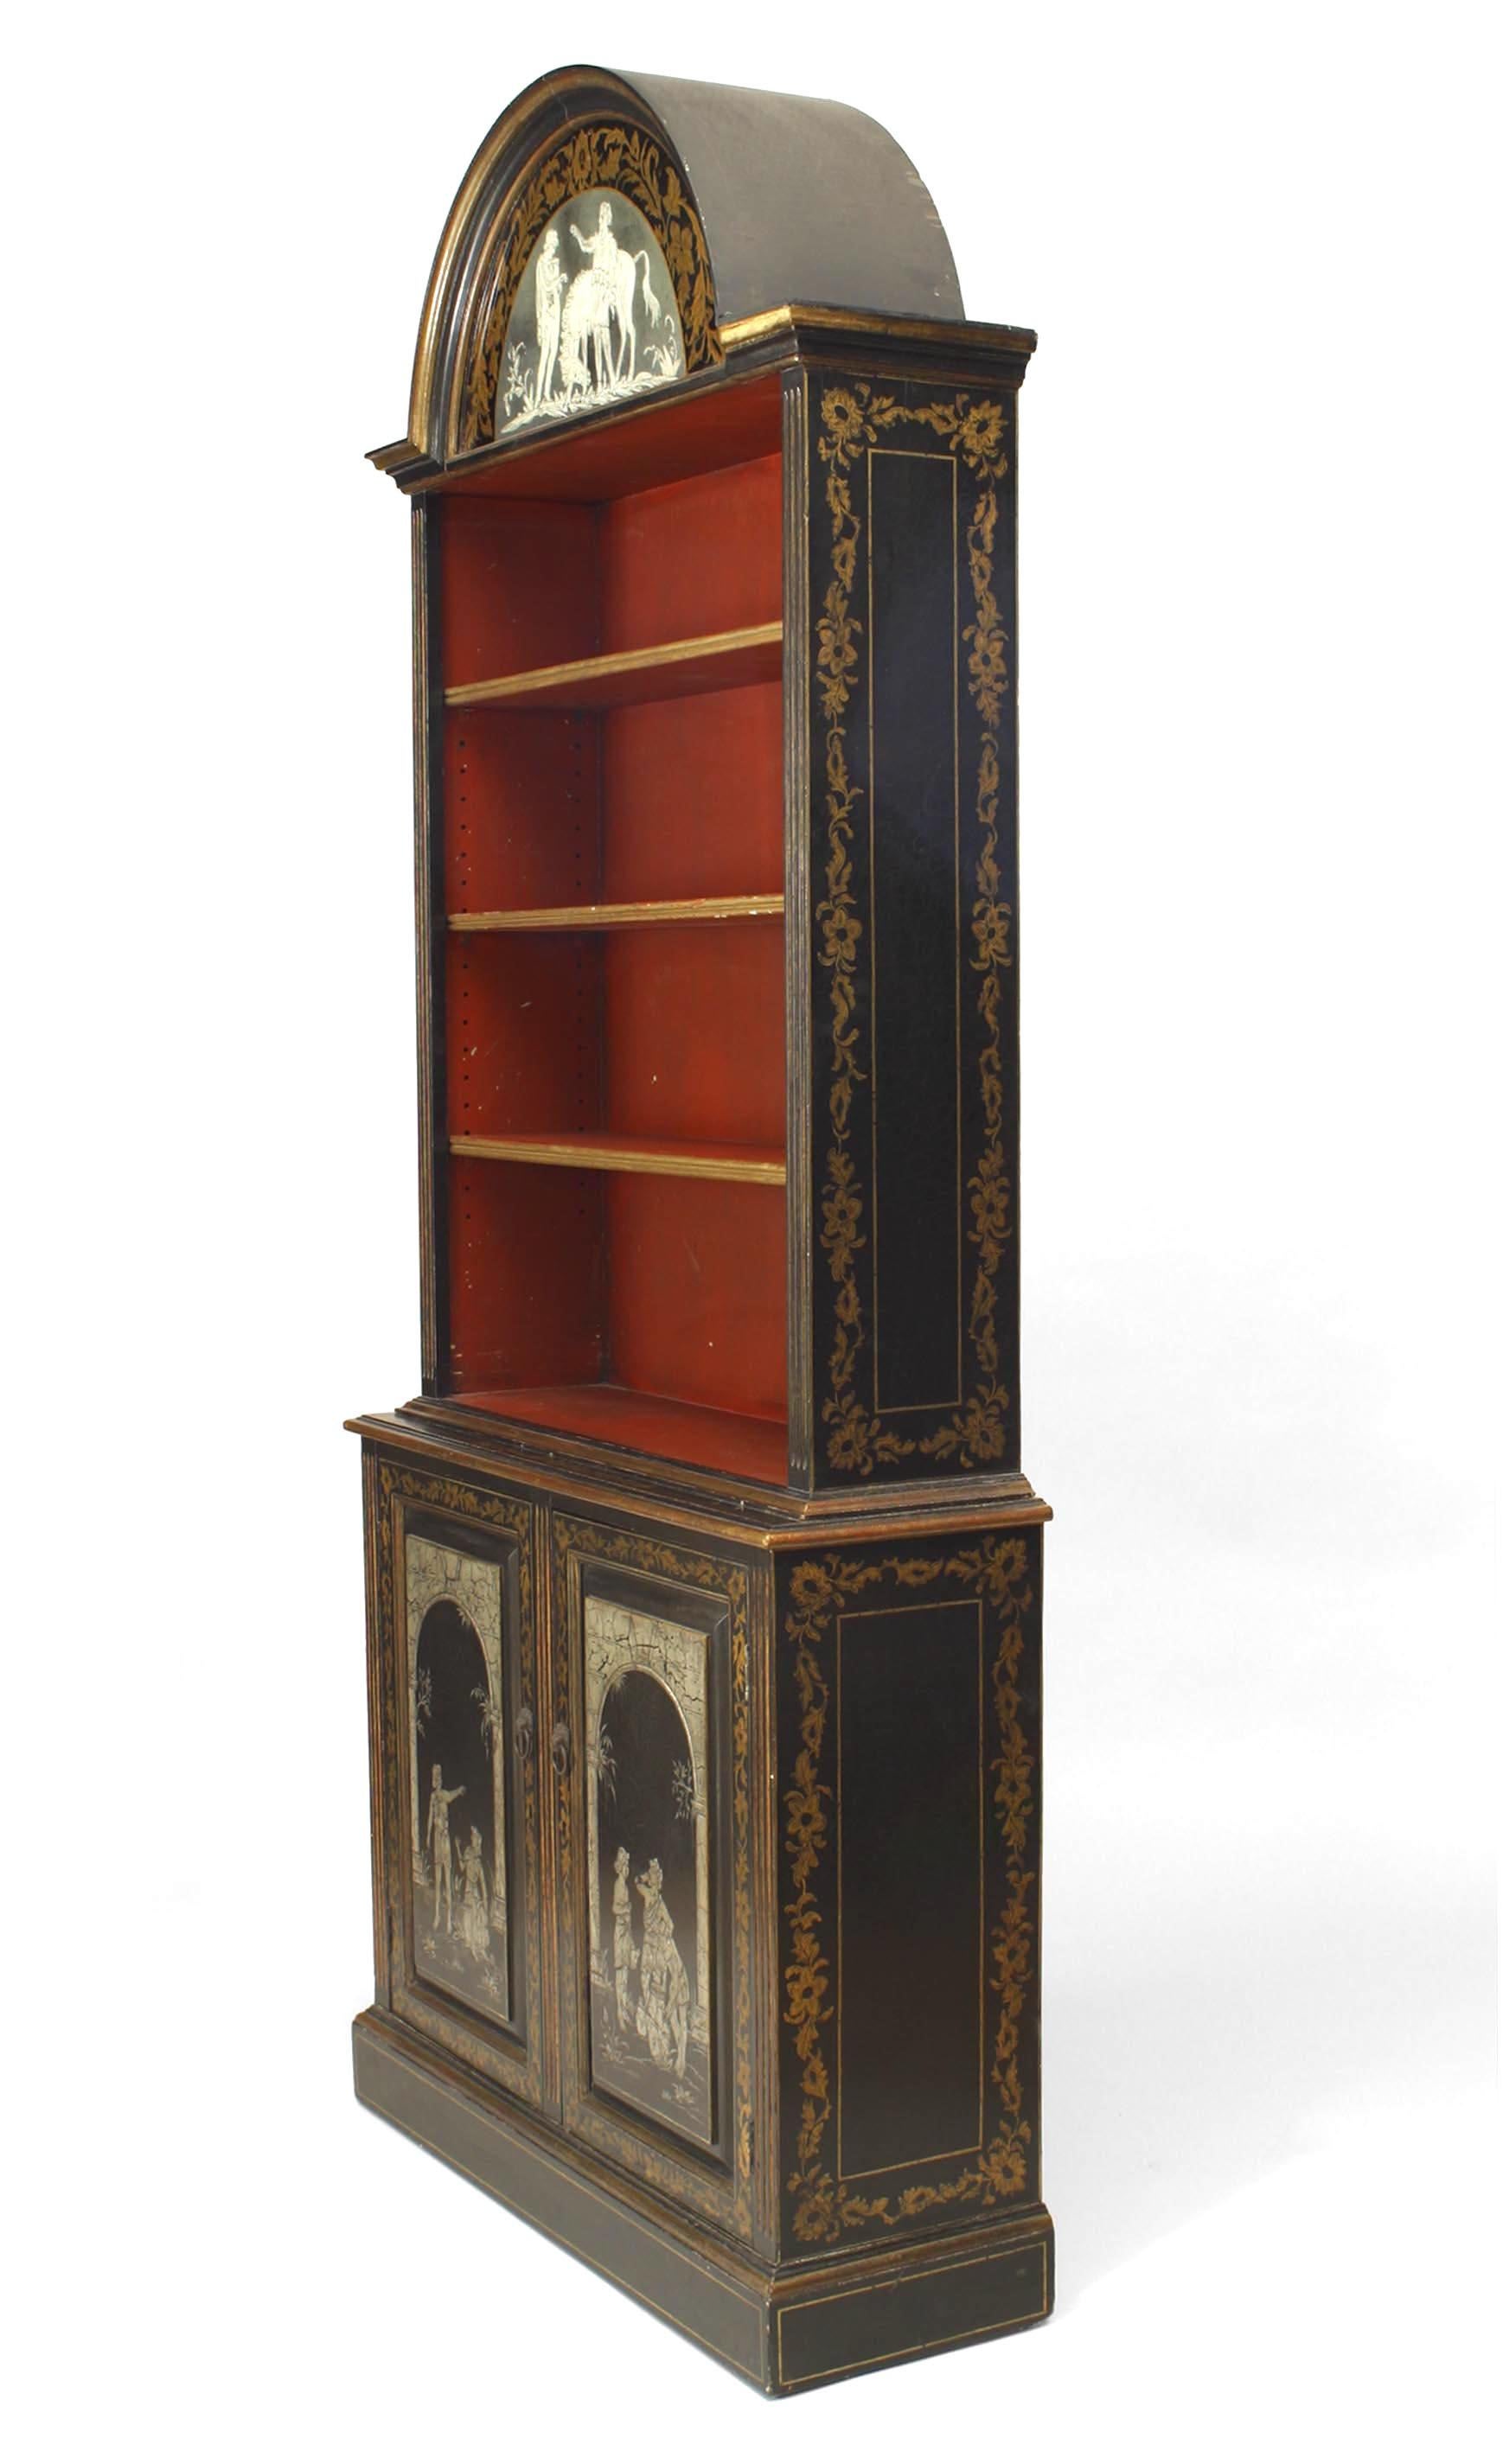 Pair of English Adam-style (20th Century) black lacquered and gilt trimmed Neo-classic bookcases with glass stenciled pediment top. (PRICED AS Pair)
